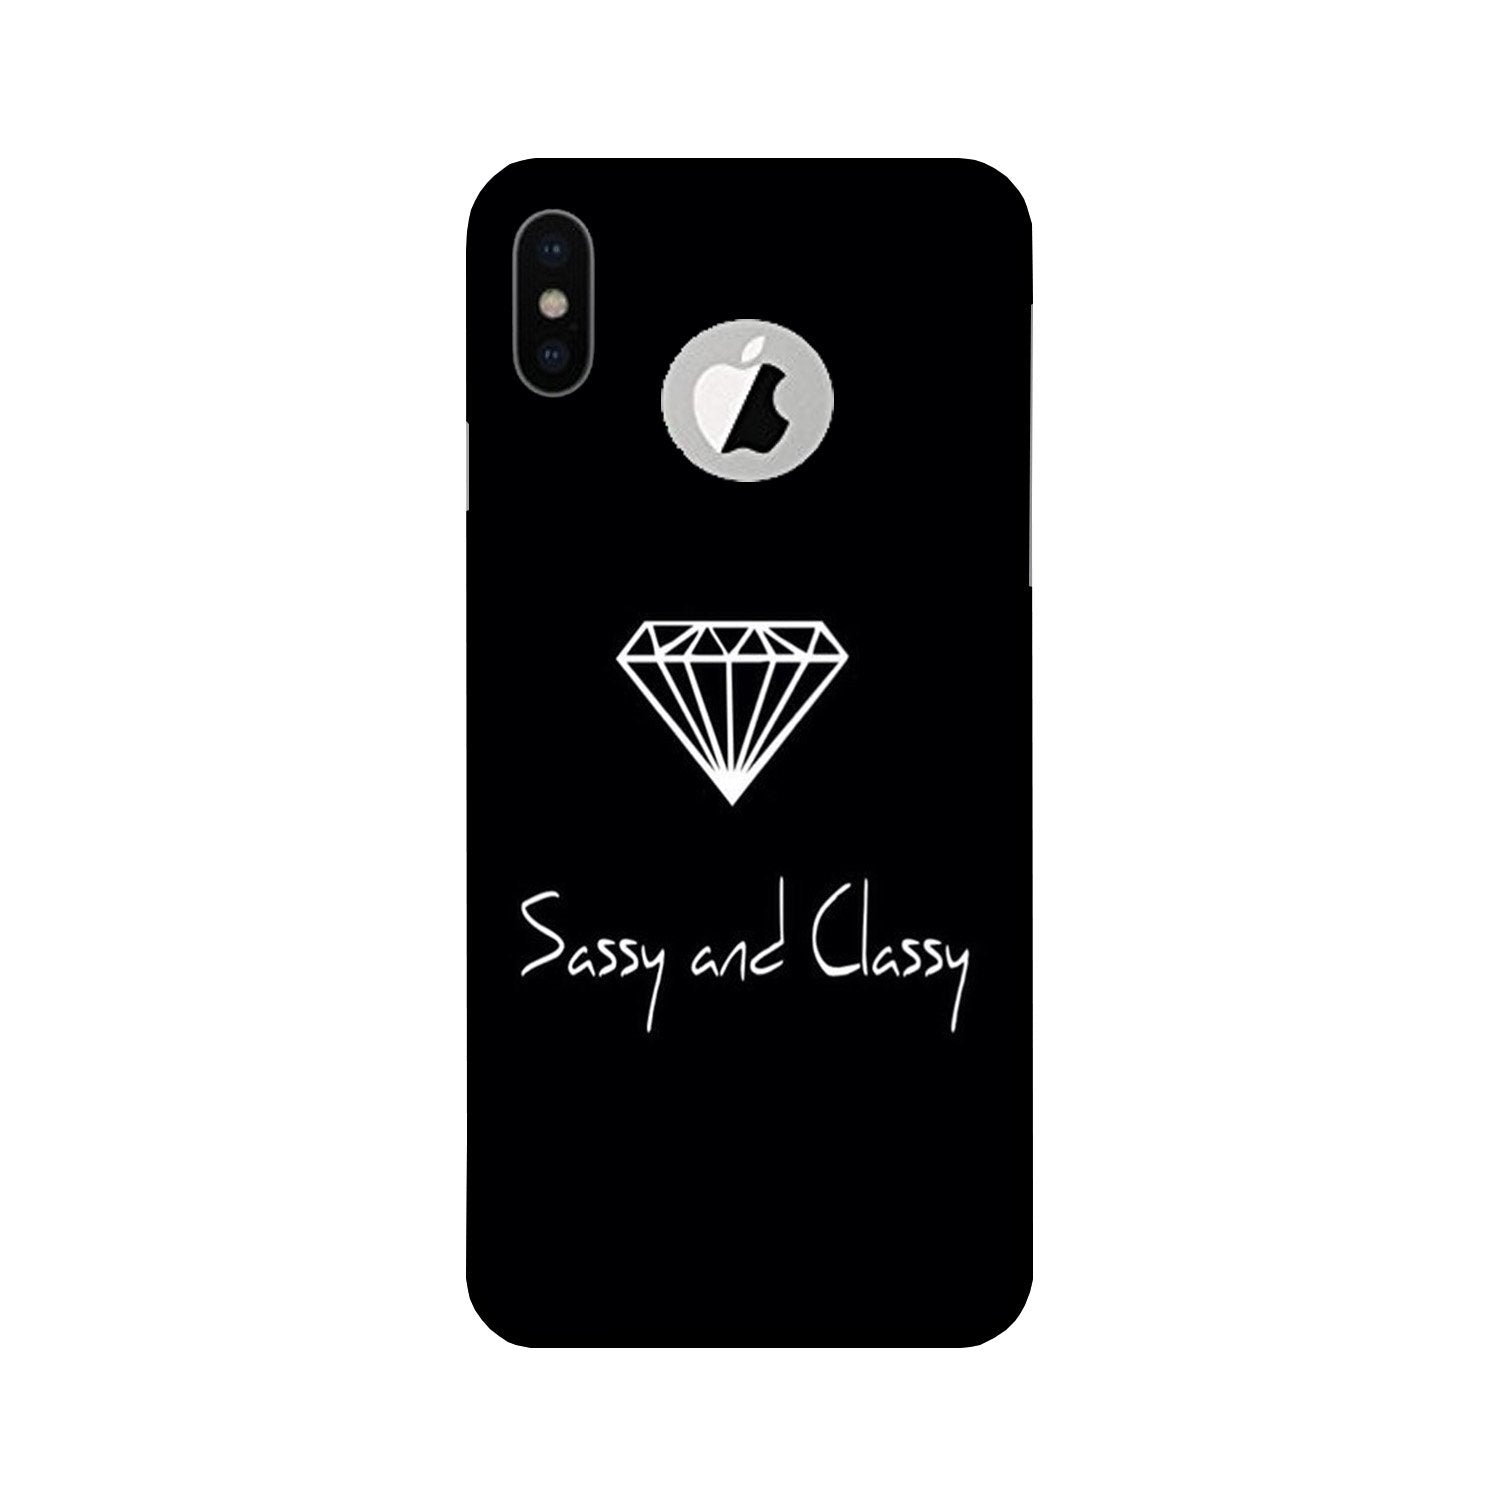 Sassy and Classy Case for iPhone Xs logo cut(Design No. 264)